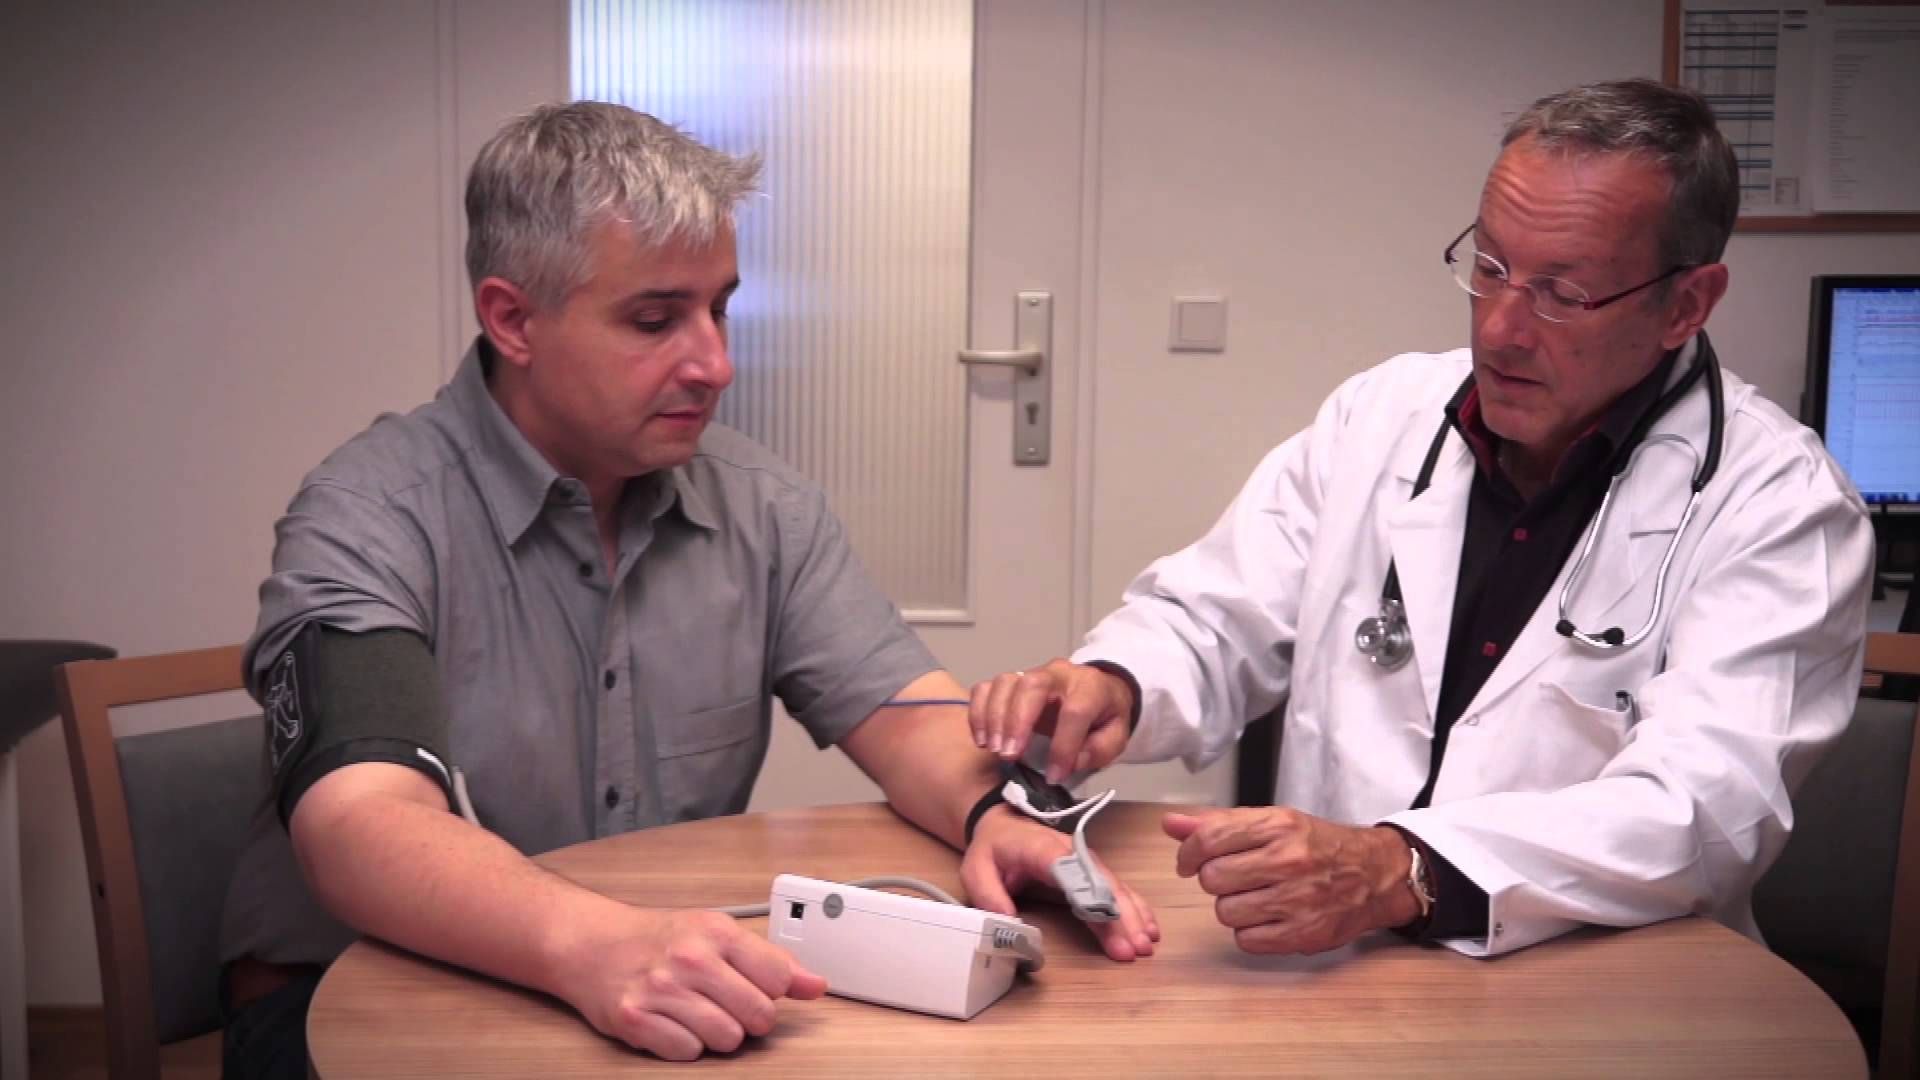 Pin on how to measure blood pressure without equipment.